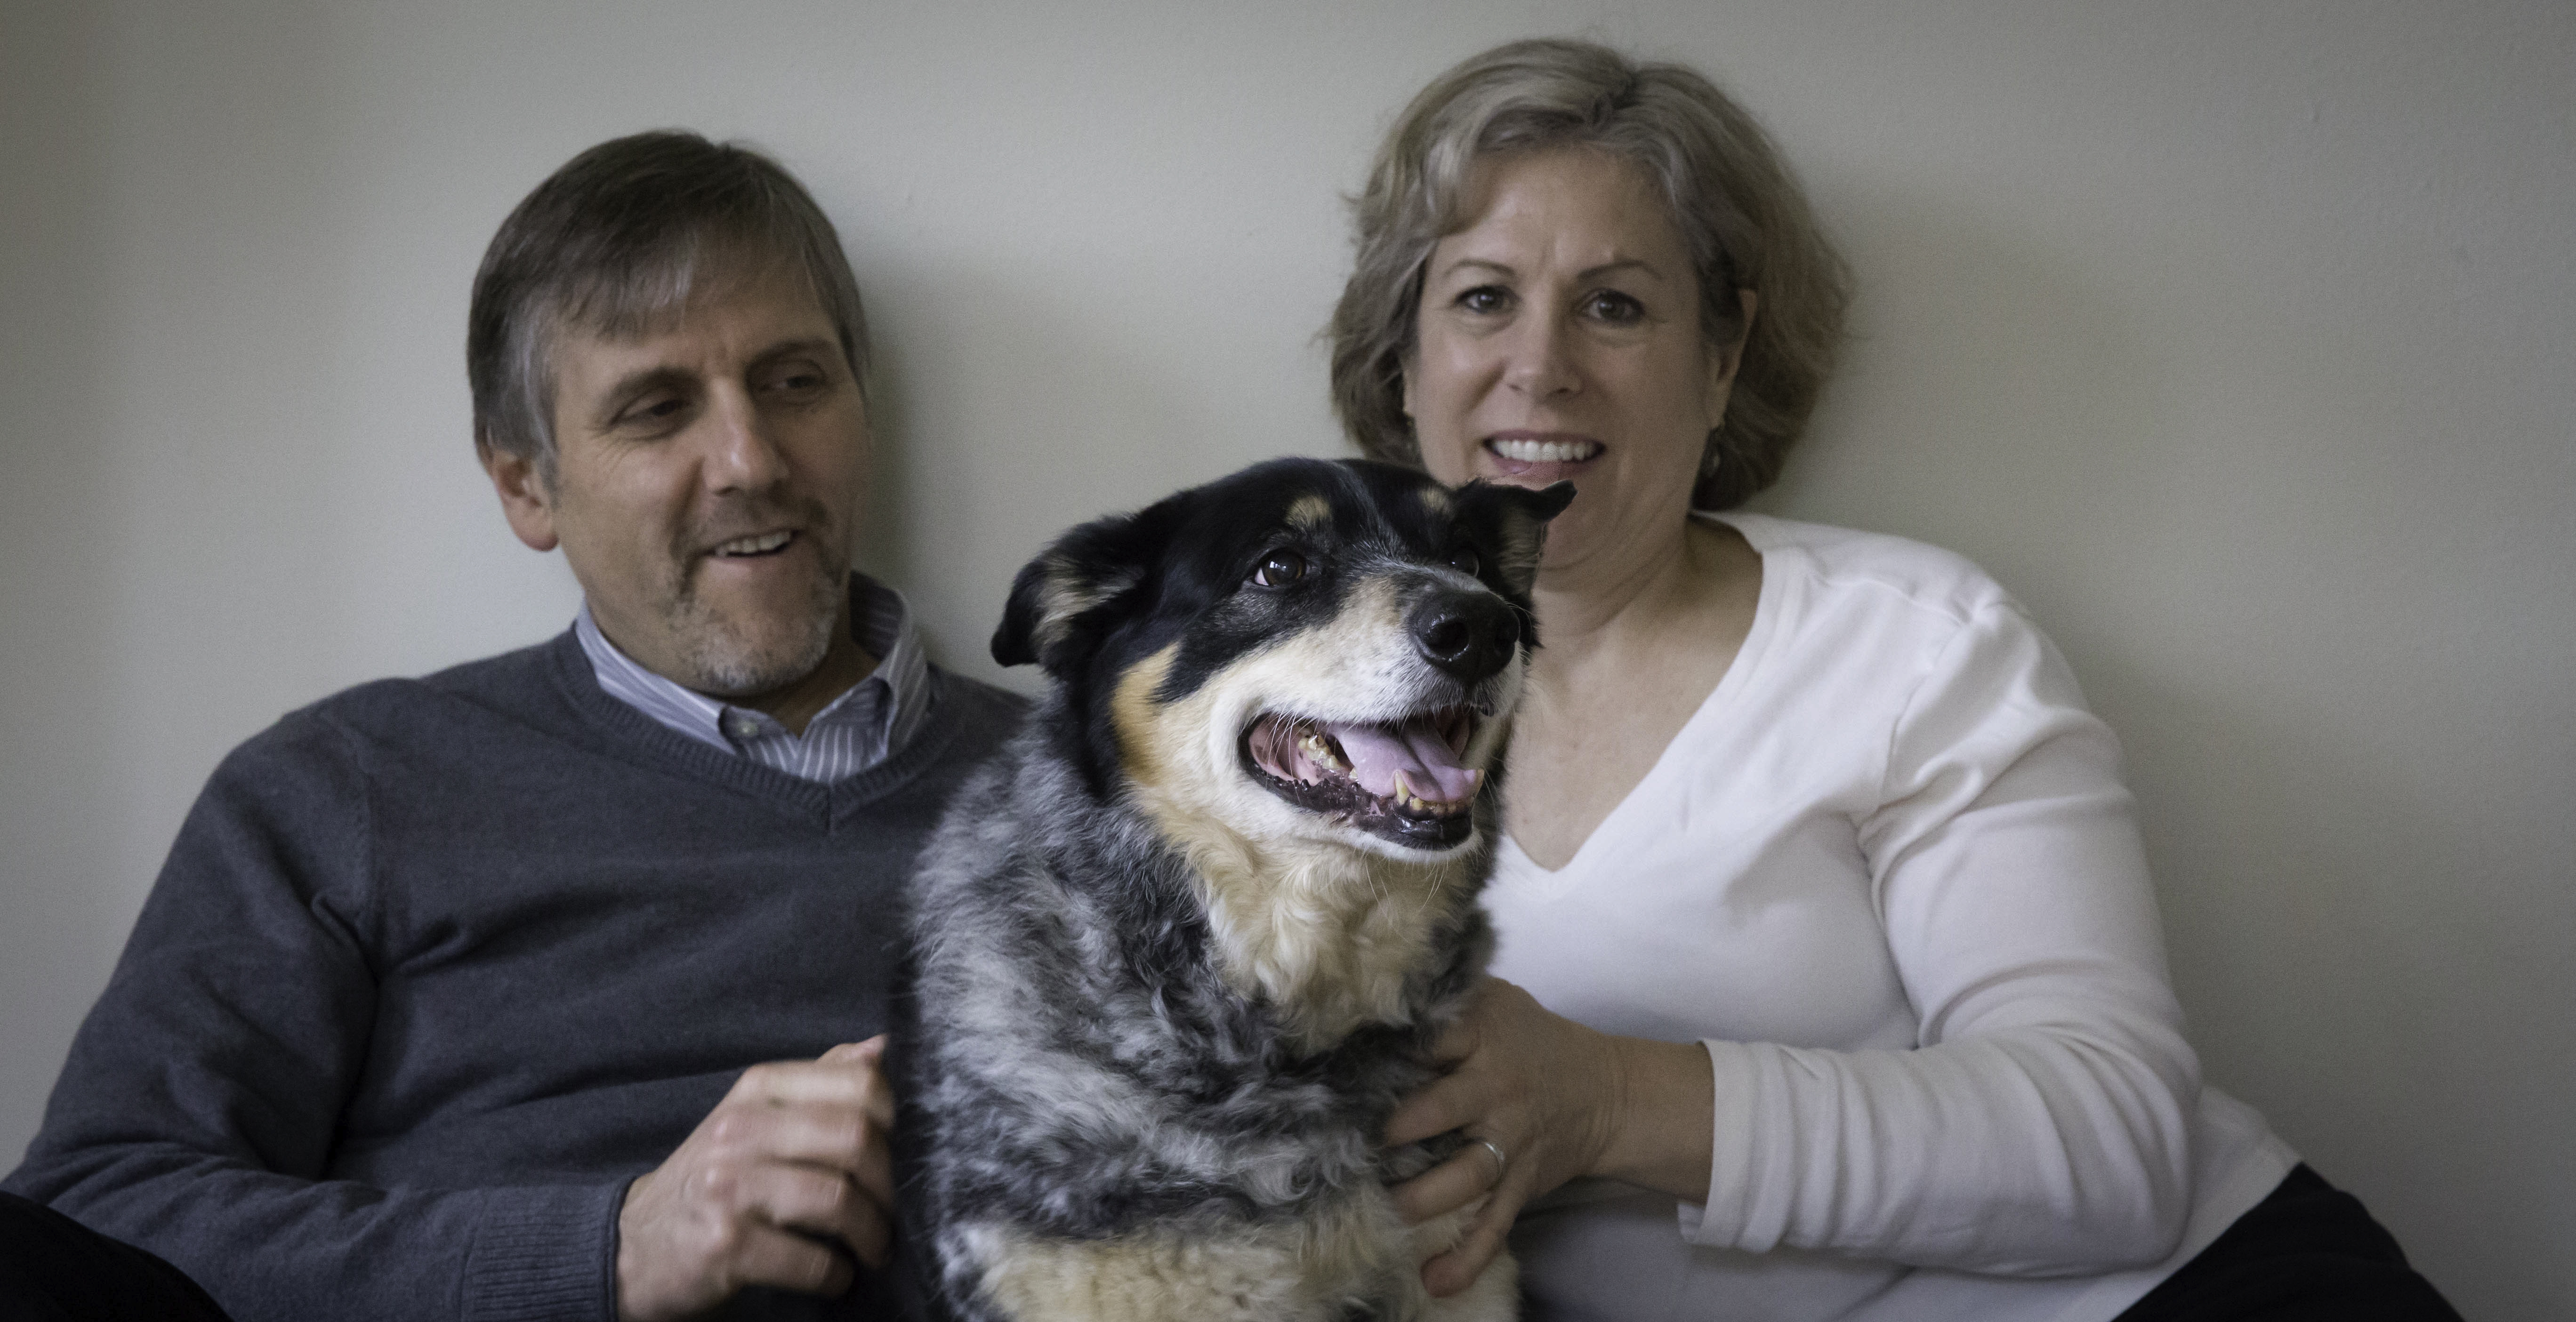 Dean Corsi, his wife Gina and their cattle dog, Chloe